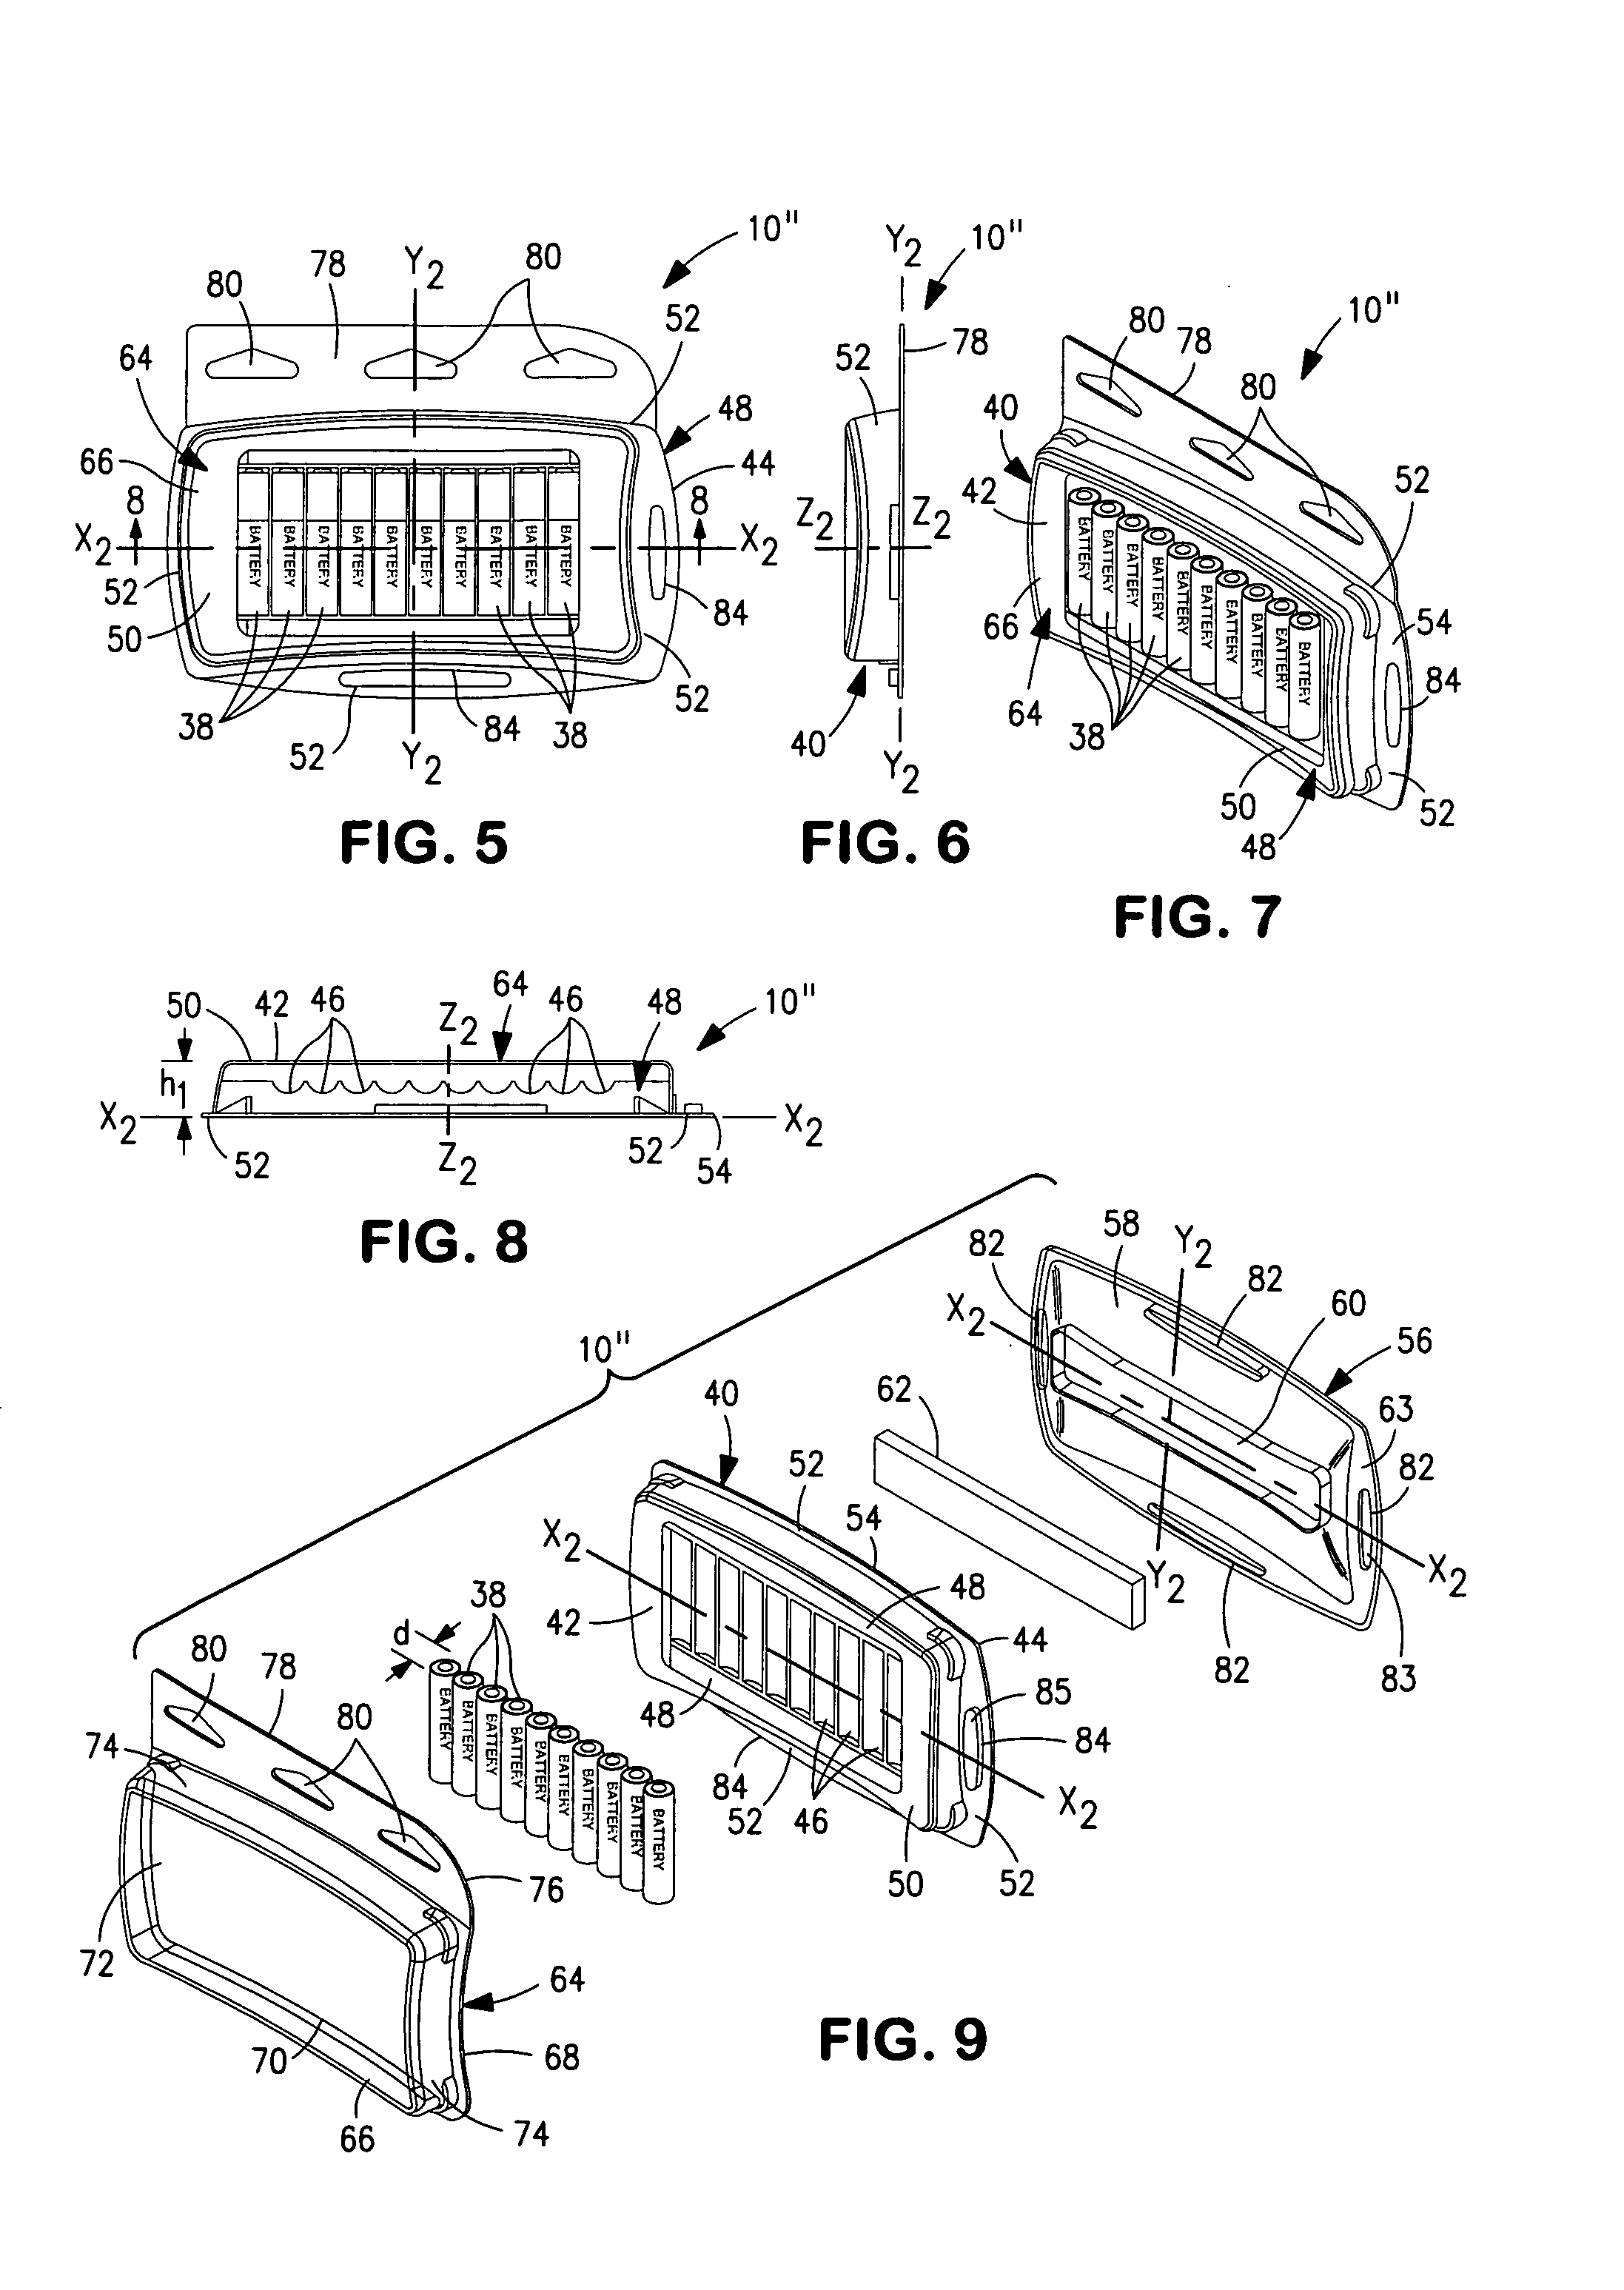 Magnetic storage device and a method of assembling the device